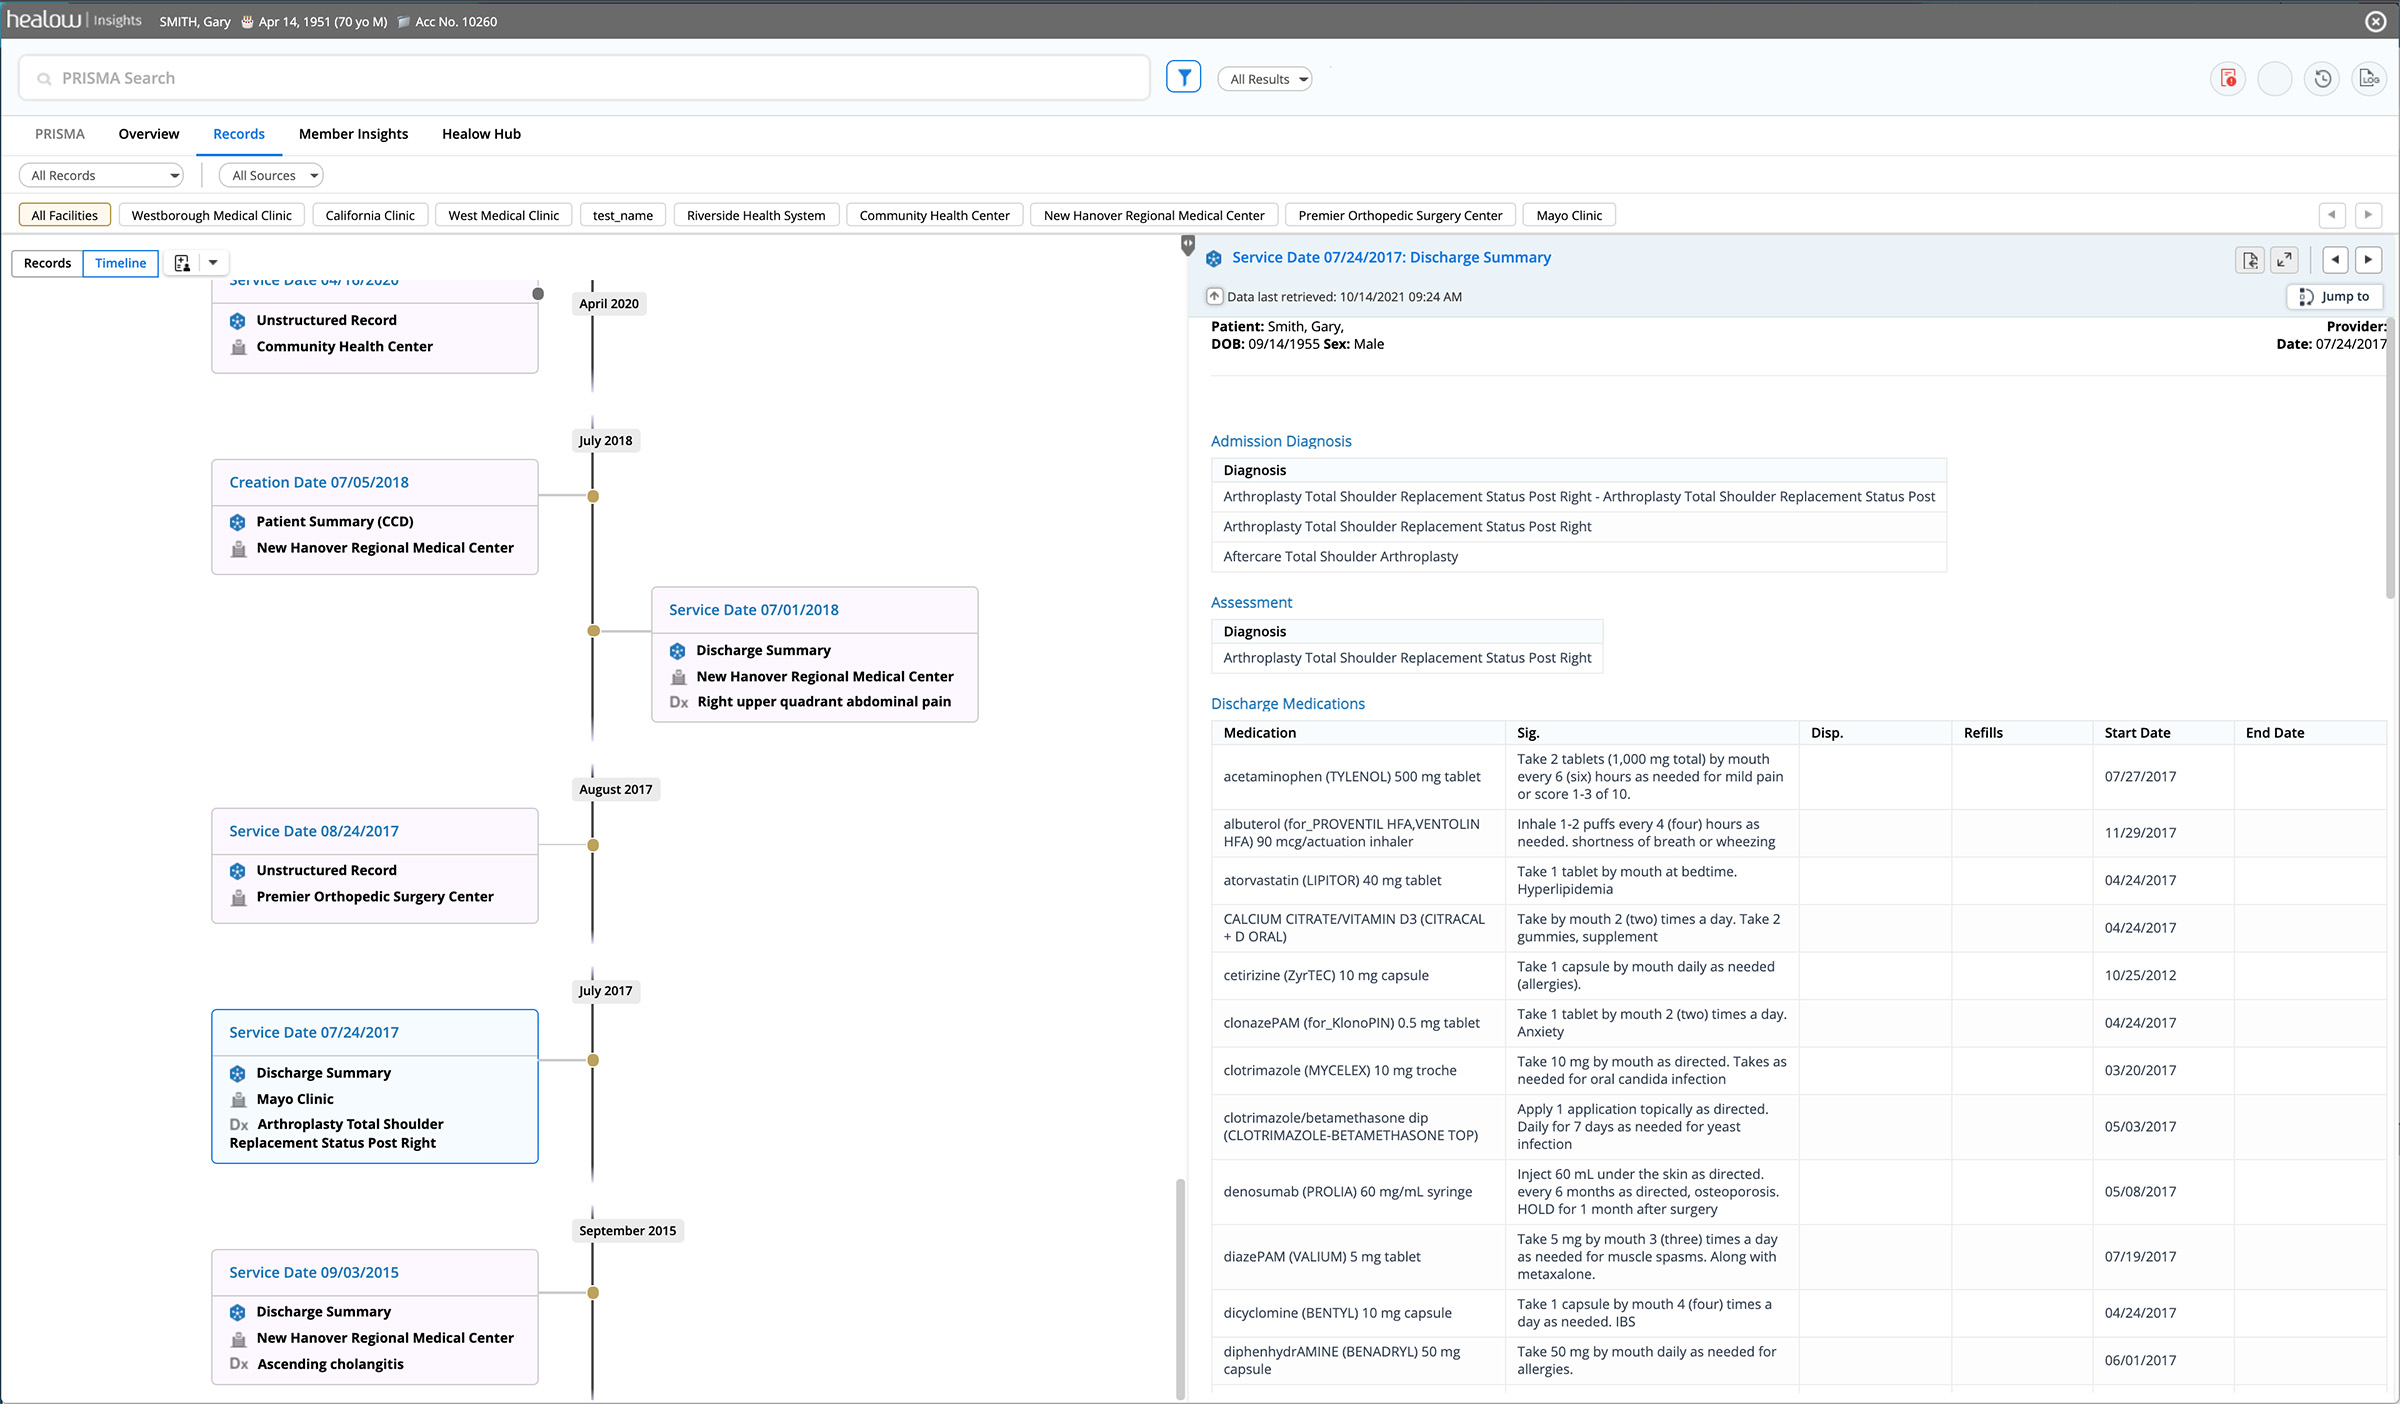 Screenshot of the timeline view of PRISMA product